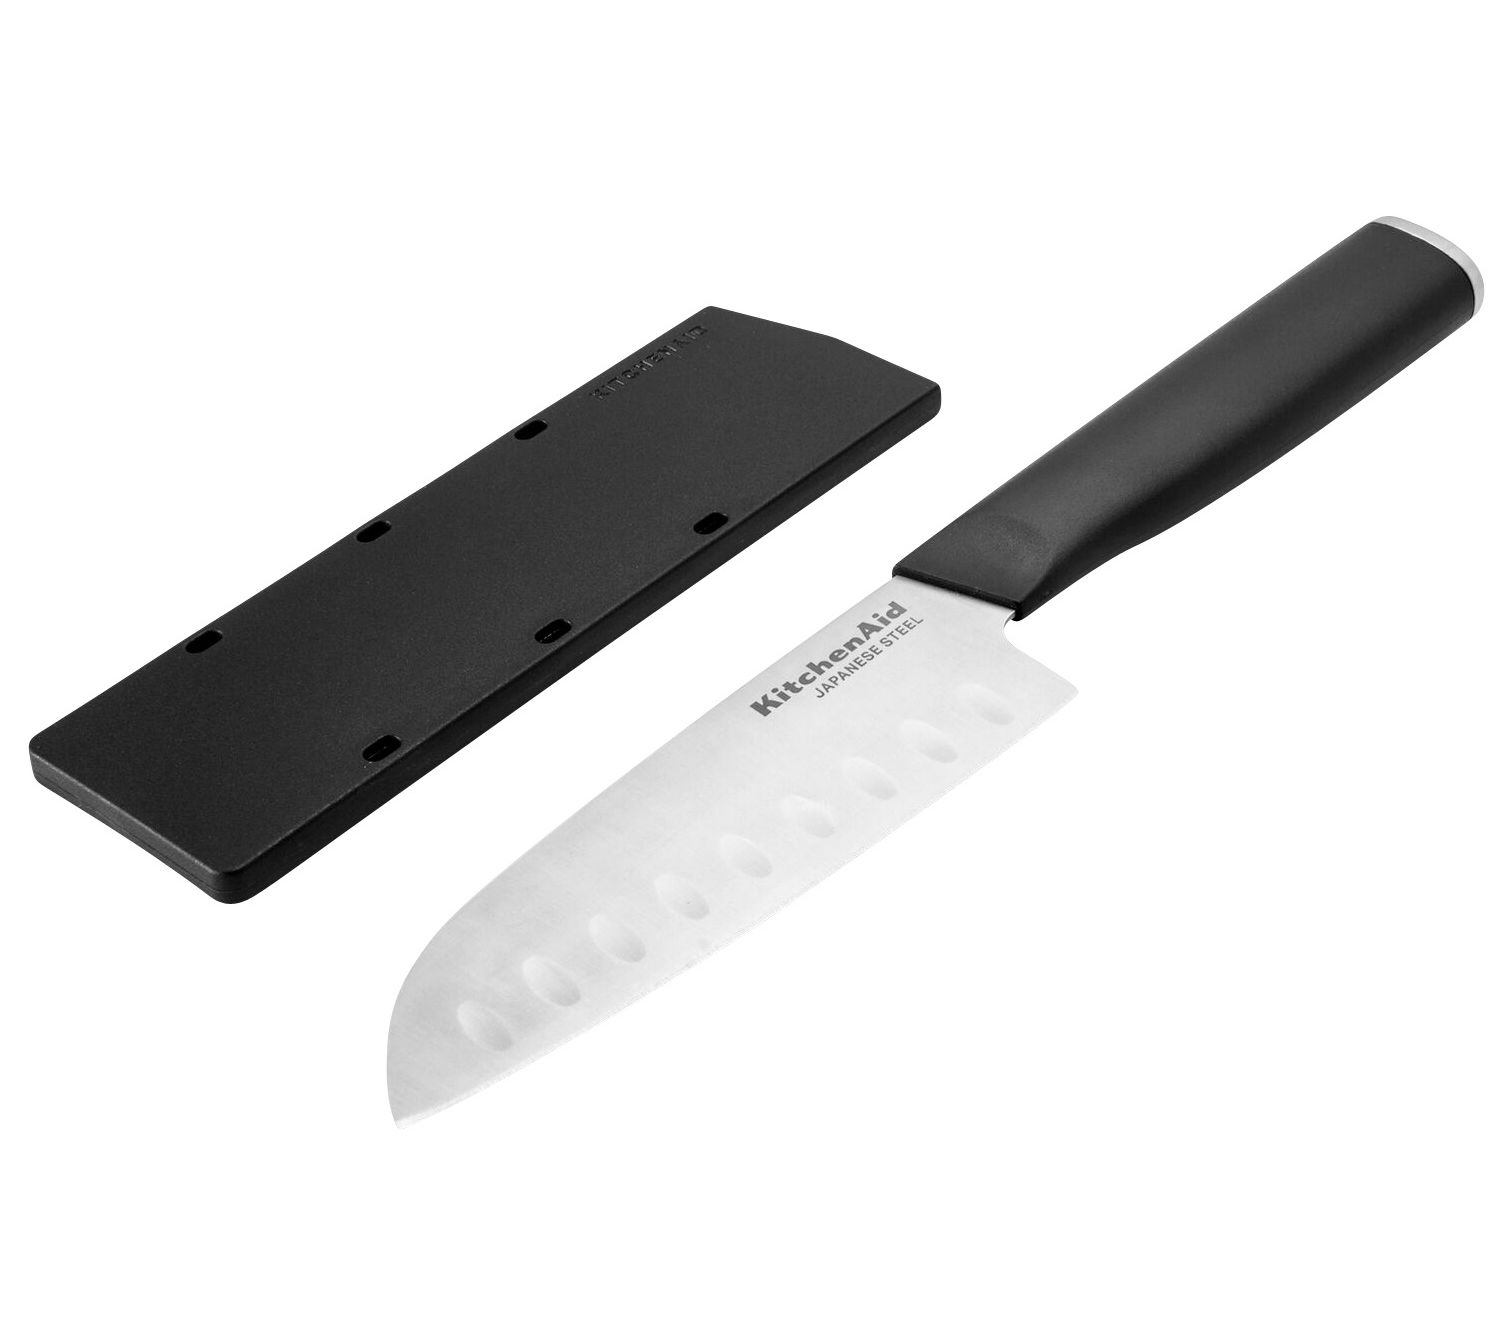  MAD SHARK Paring Knife 5 inch - Small Kitchen Knife